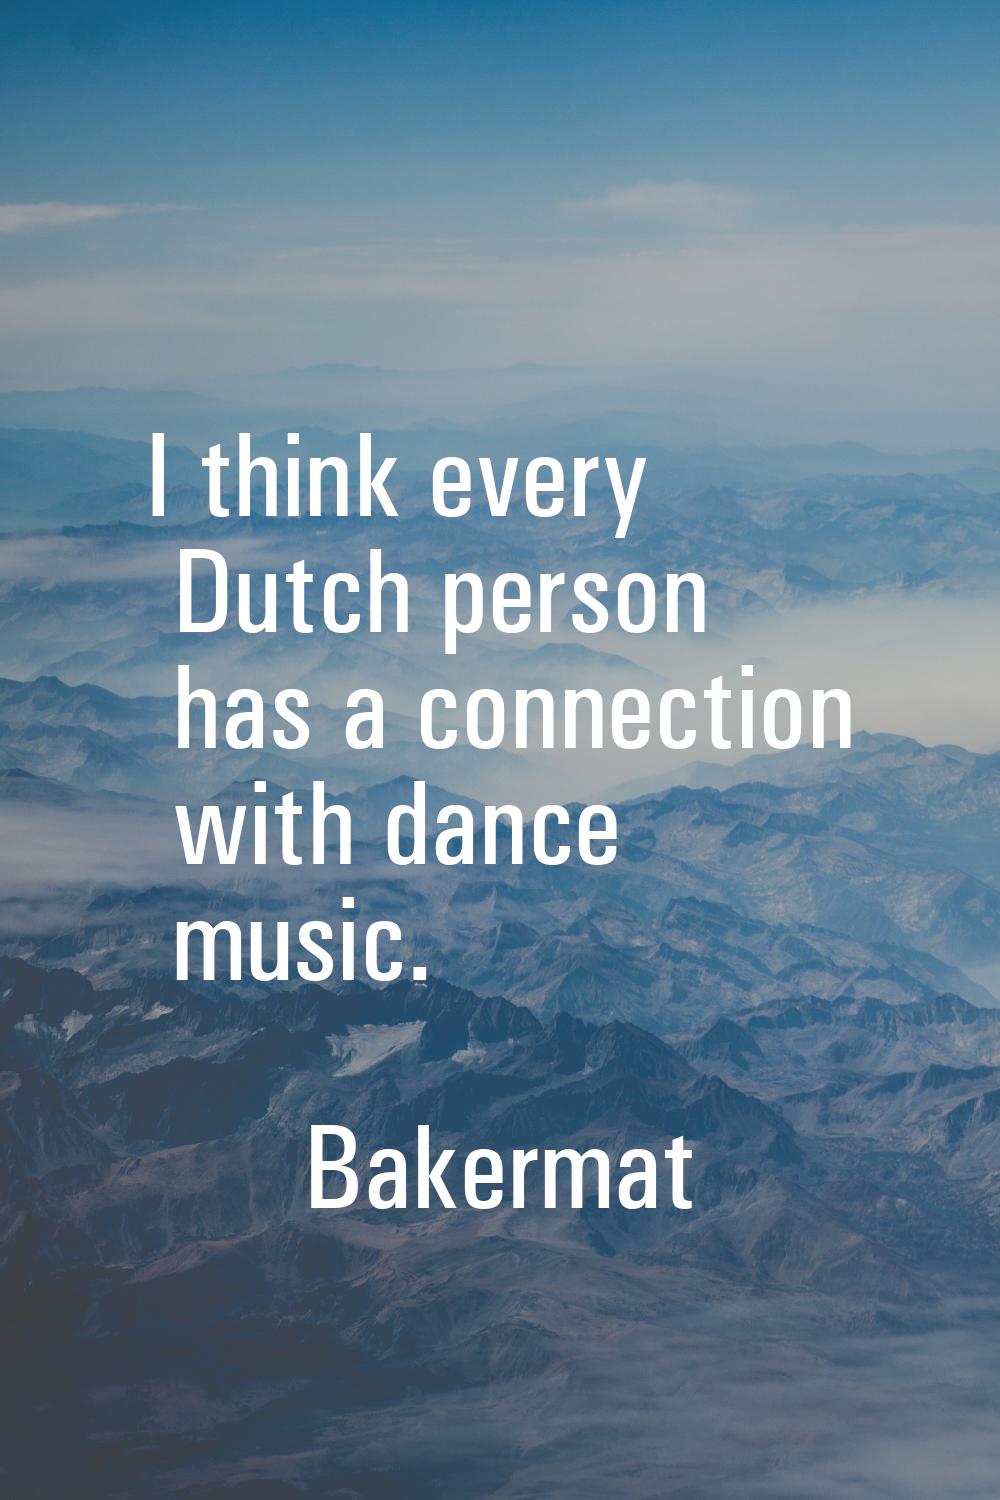 I think every Dutch person has a connection with dance music.